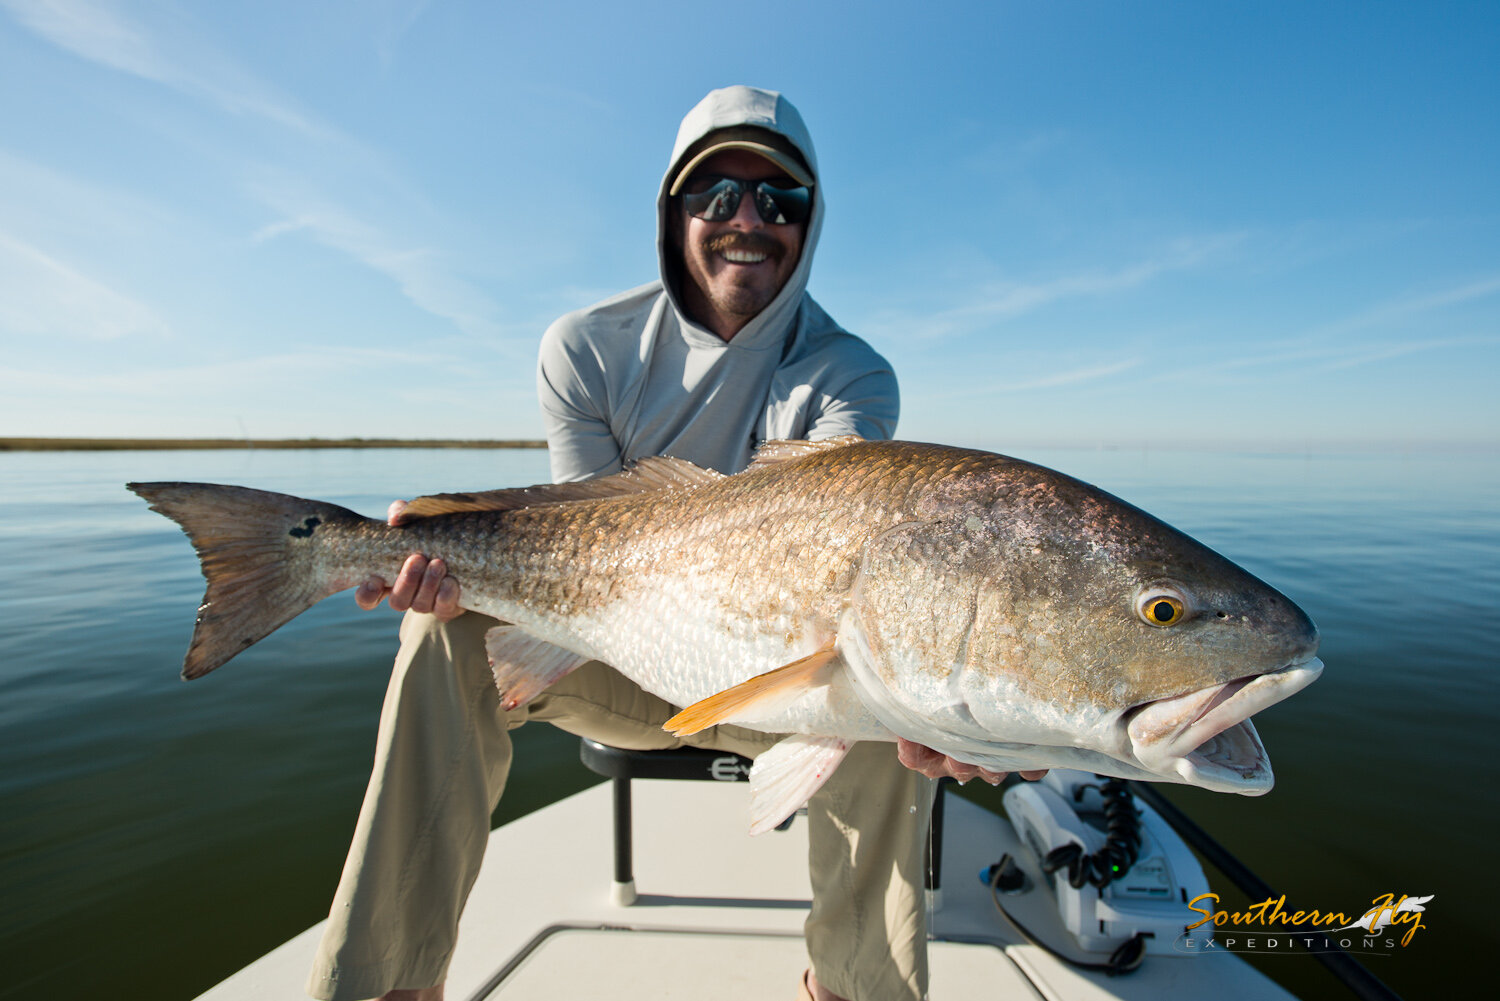 2019-11-24_SouthernFlyExpeditions_NewOrleans_TomHamiltonGroup-Harvey-8.jpg